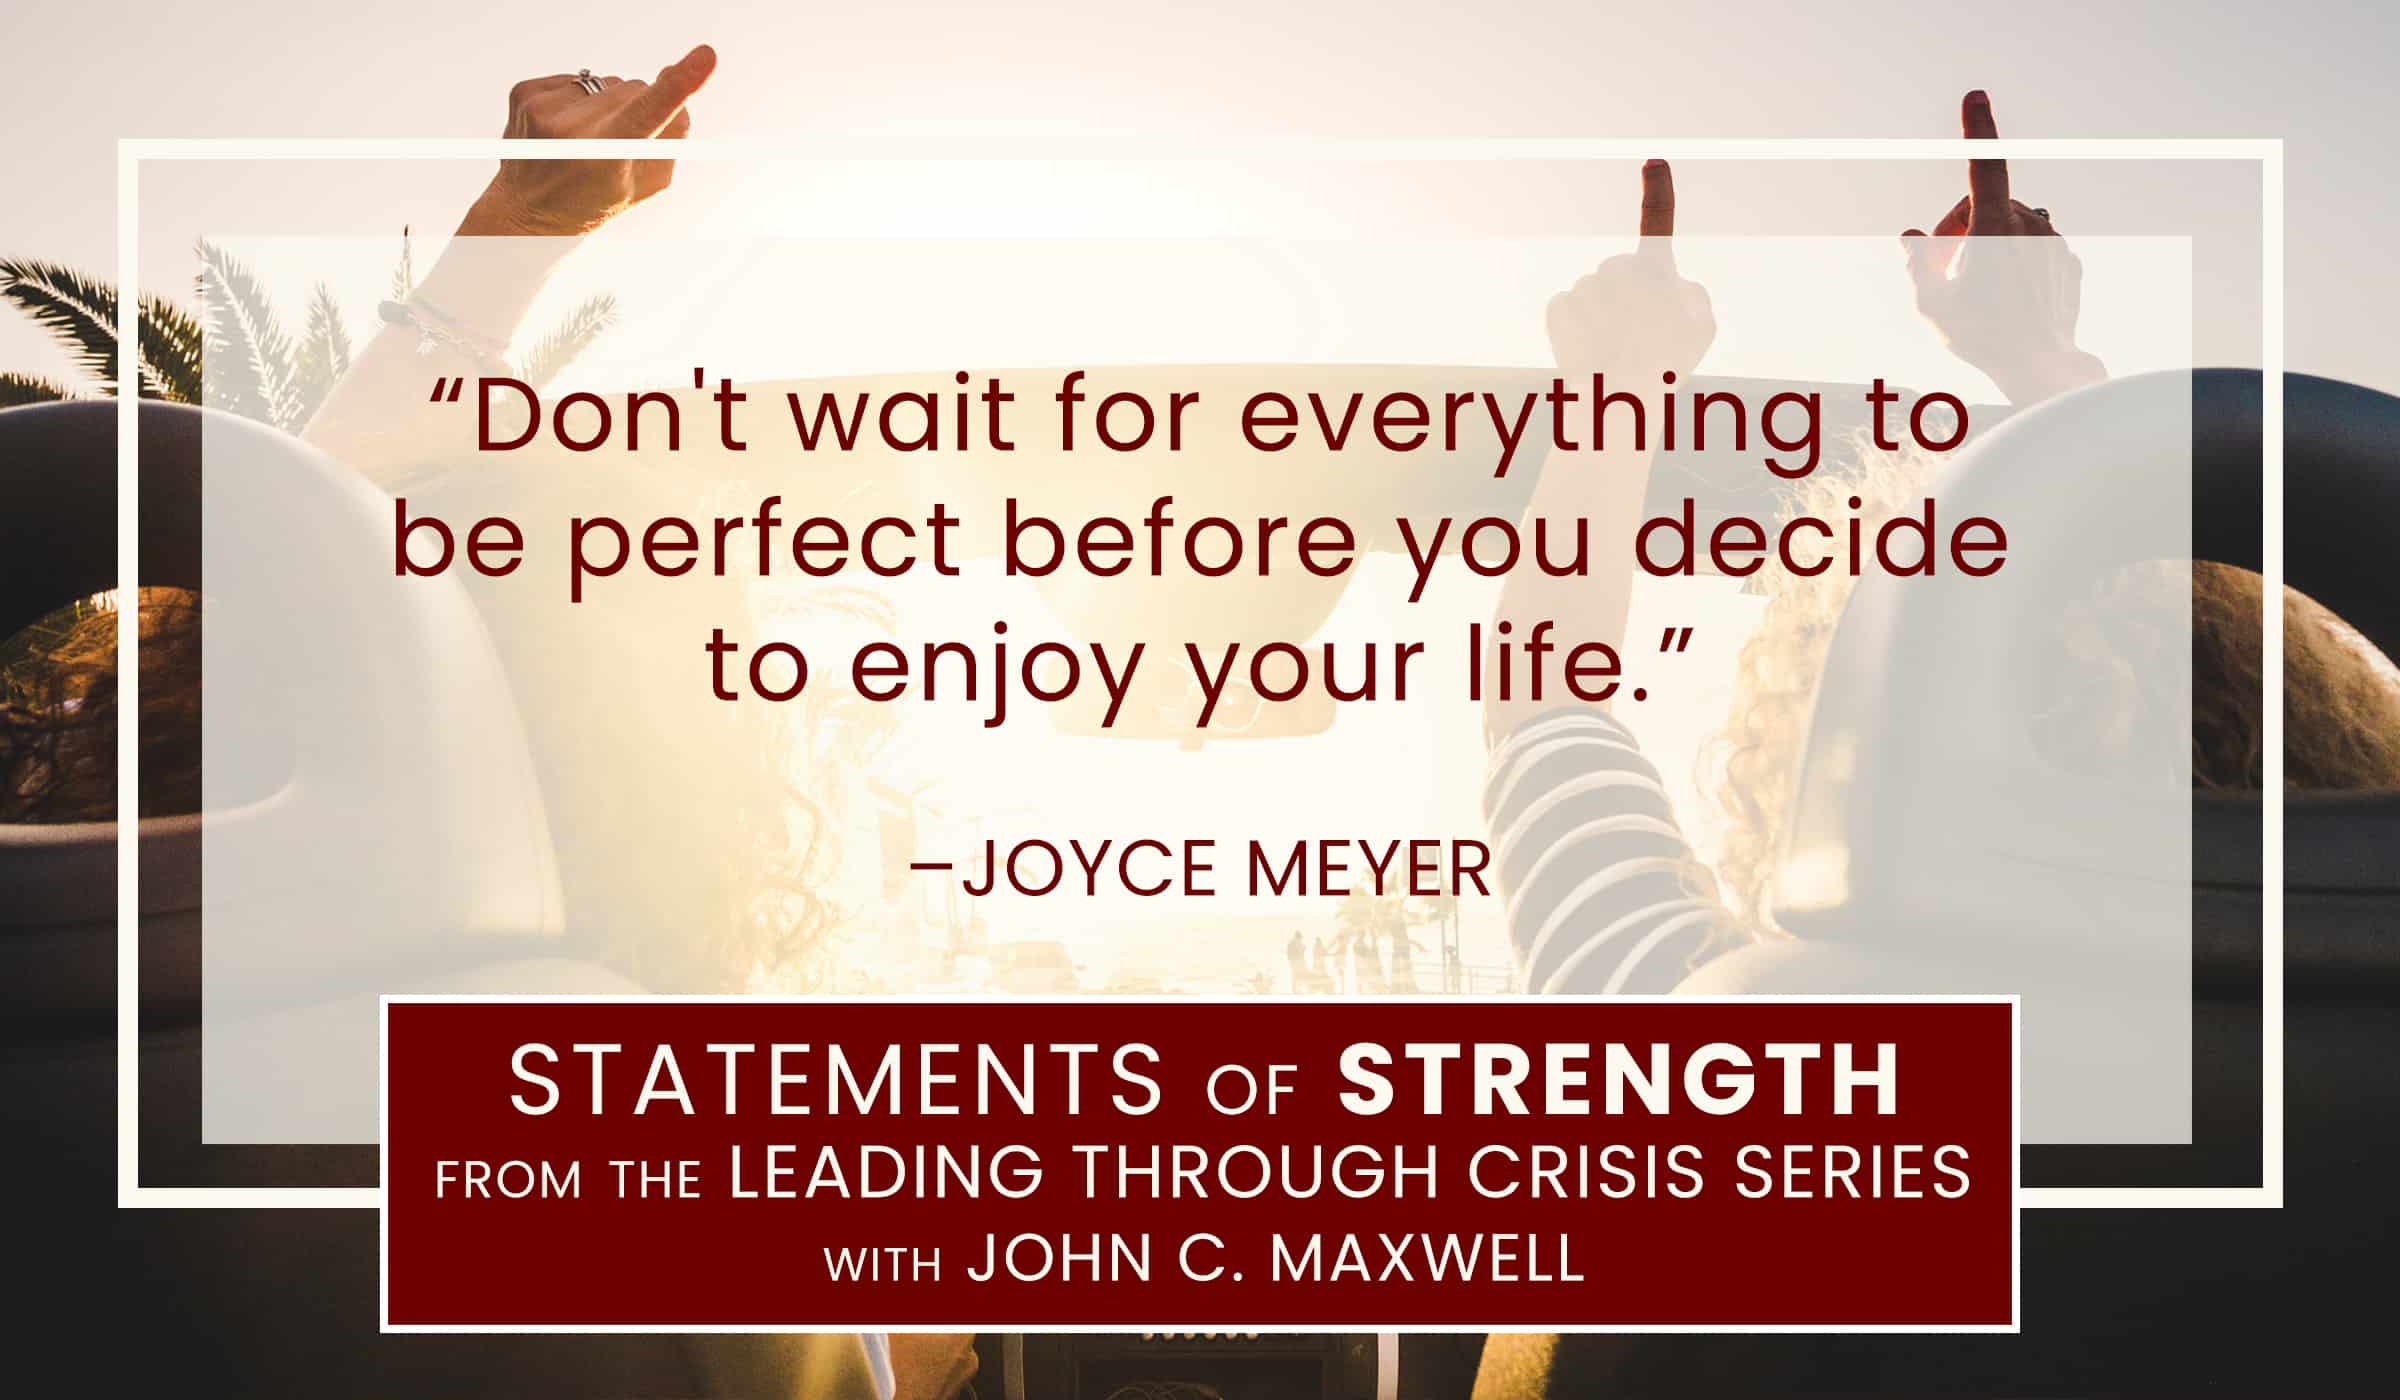 image of quotation picture with text quote from joyce meyer